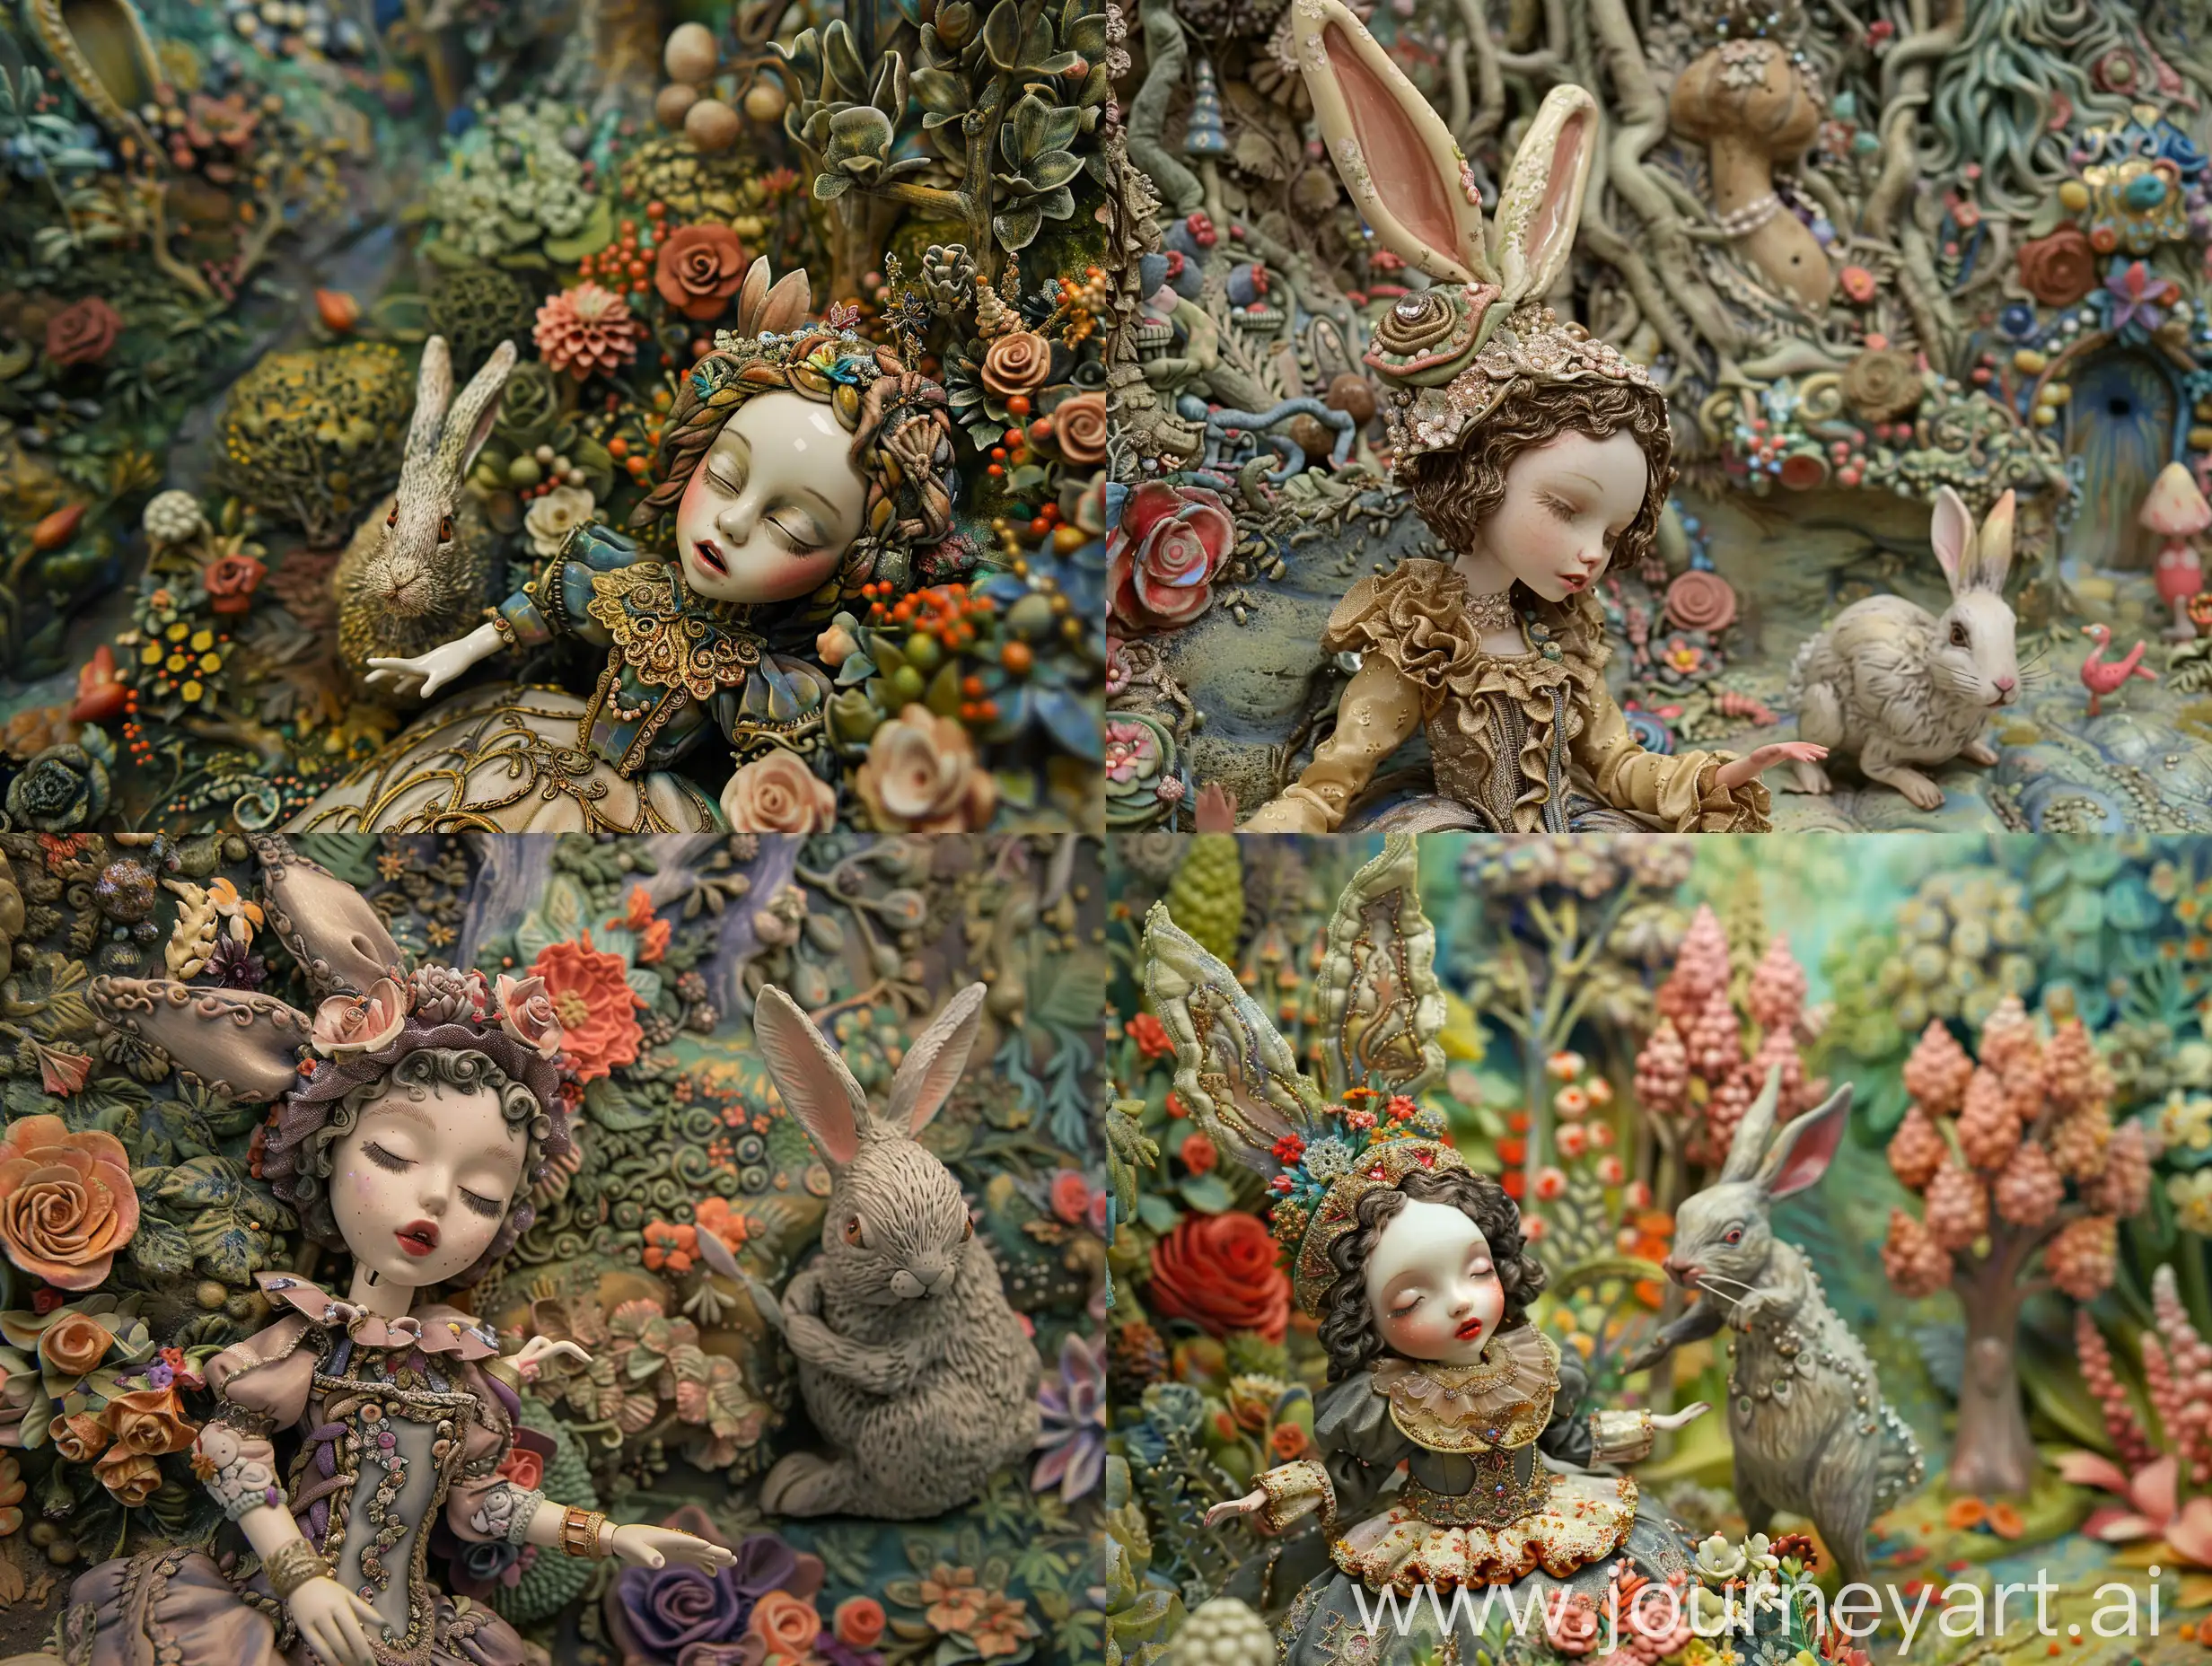 A ceramic art doll in the shape of a fairy tale. In the story, girl in a boudoir in the Baroque style, expensive - rich, intricate, complex, interesting, extravagant, splendor of decoration, luxury. a girl is wearing noble princess costume, noble princess nightcap, She suffers from sleepwalking. She closes her eyes, stretches her hands, and walks aimlessly in the boudoir. The style is inspired by Laurel Burch and Eric Carle. A curious giant rabbit is next to the girl, looking at her with interest. The forest is wide and colorful, with different kinds of trees and flowers. The angle is changed to show a high-angle shot of the scene, with the girl and the rabbit looking small and vulnerable in the vast forest. 8k